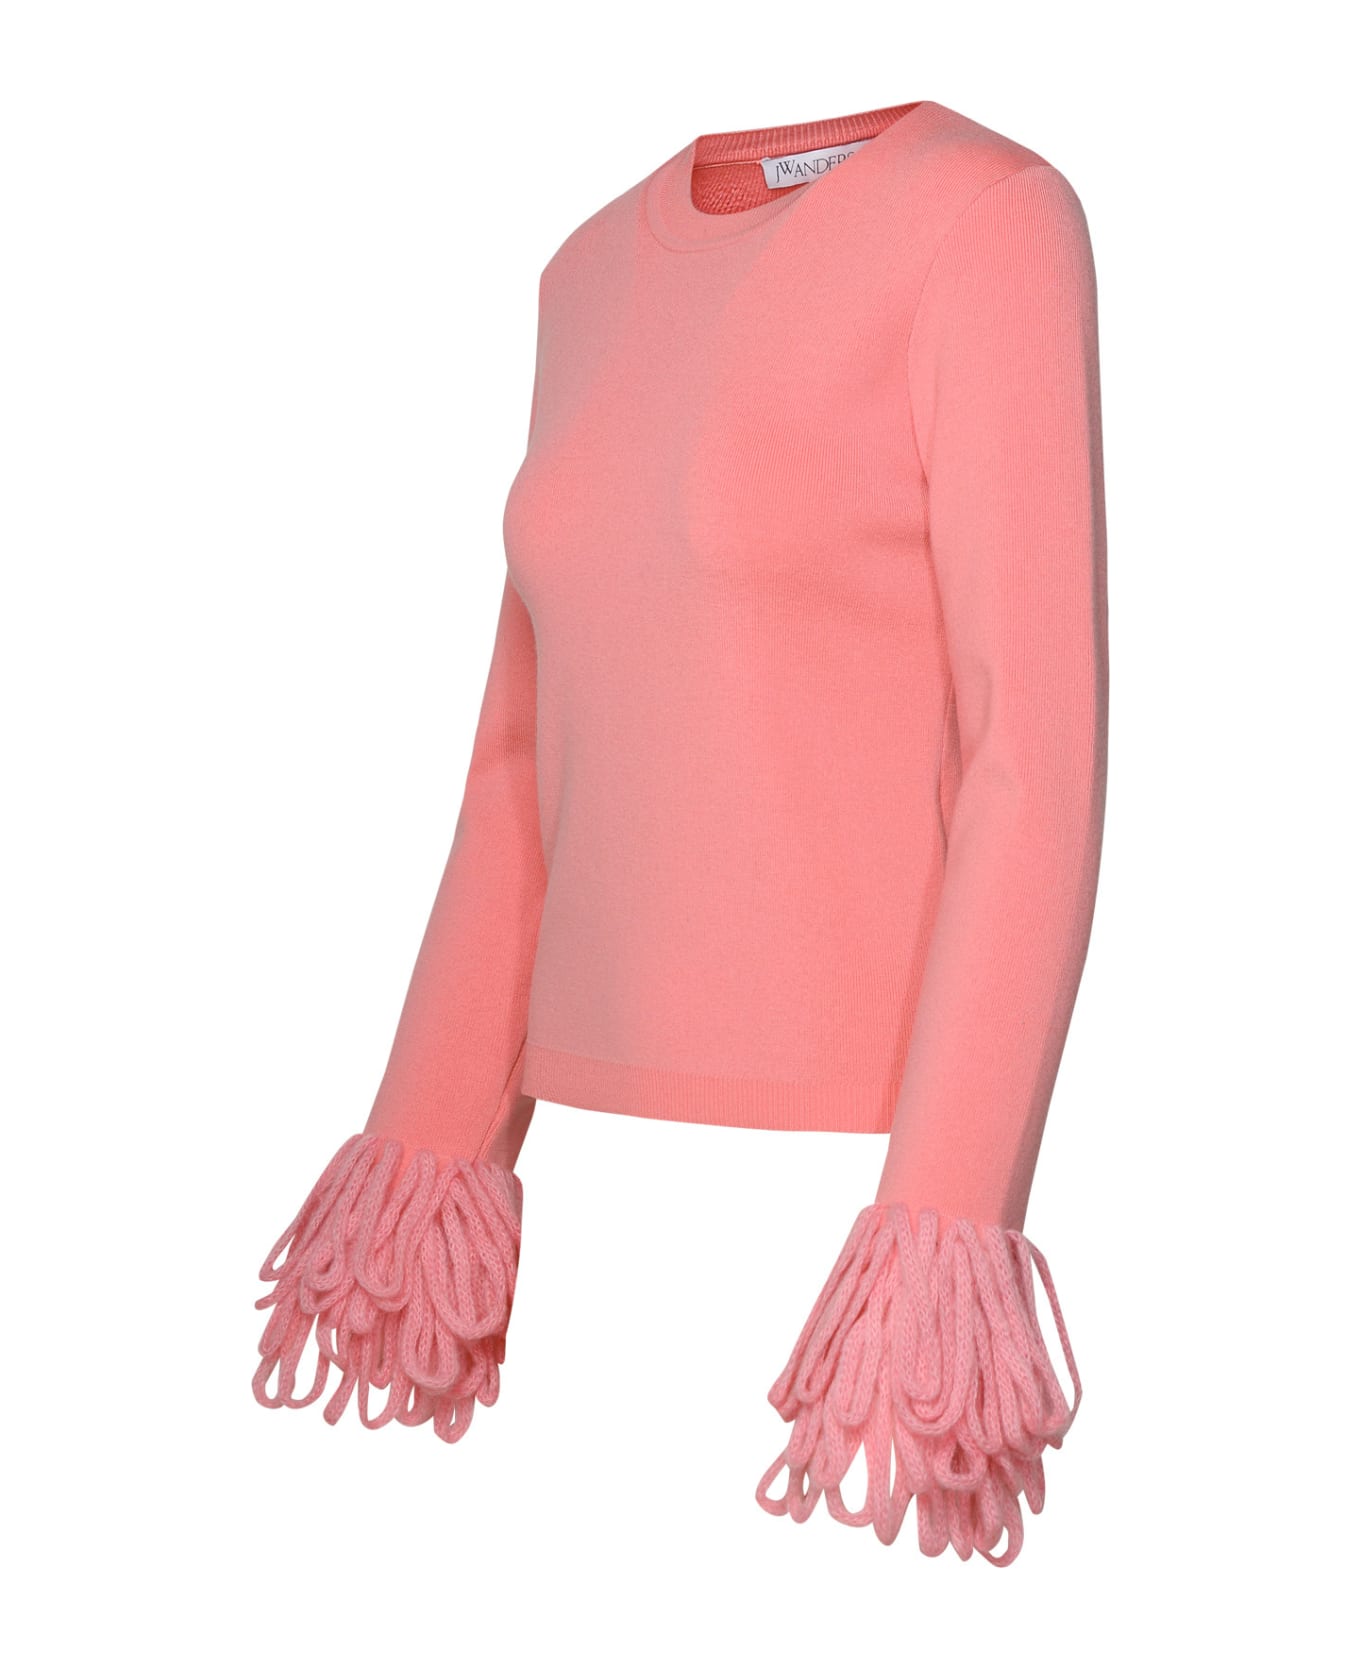 J.W. Anderson Pink Wool Blend Sweater - Pink